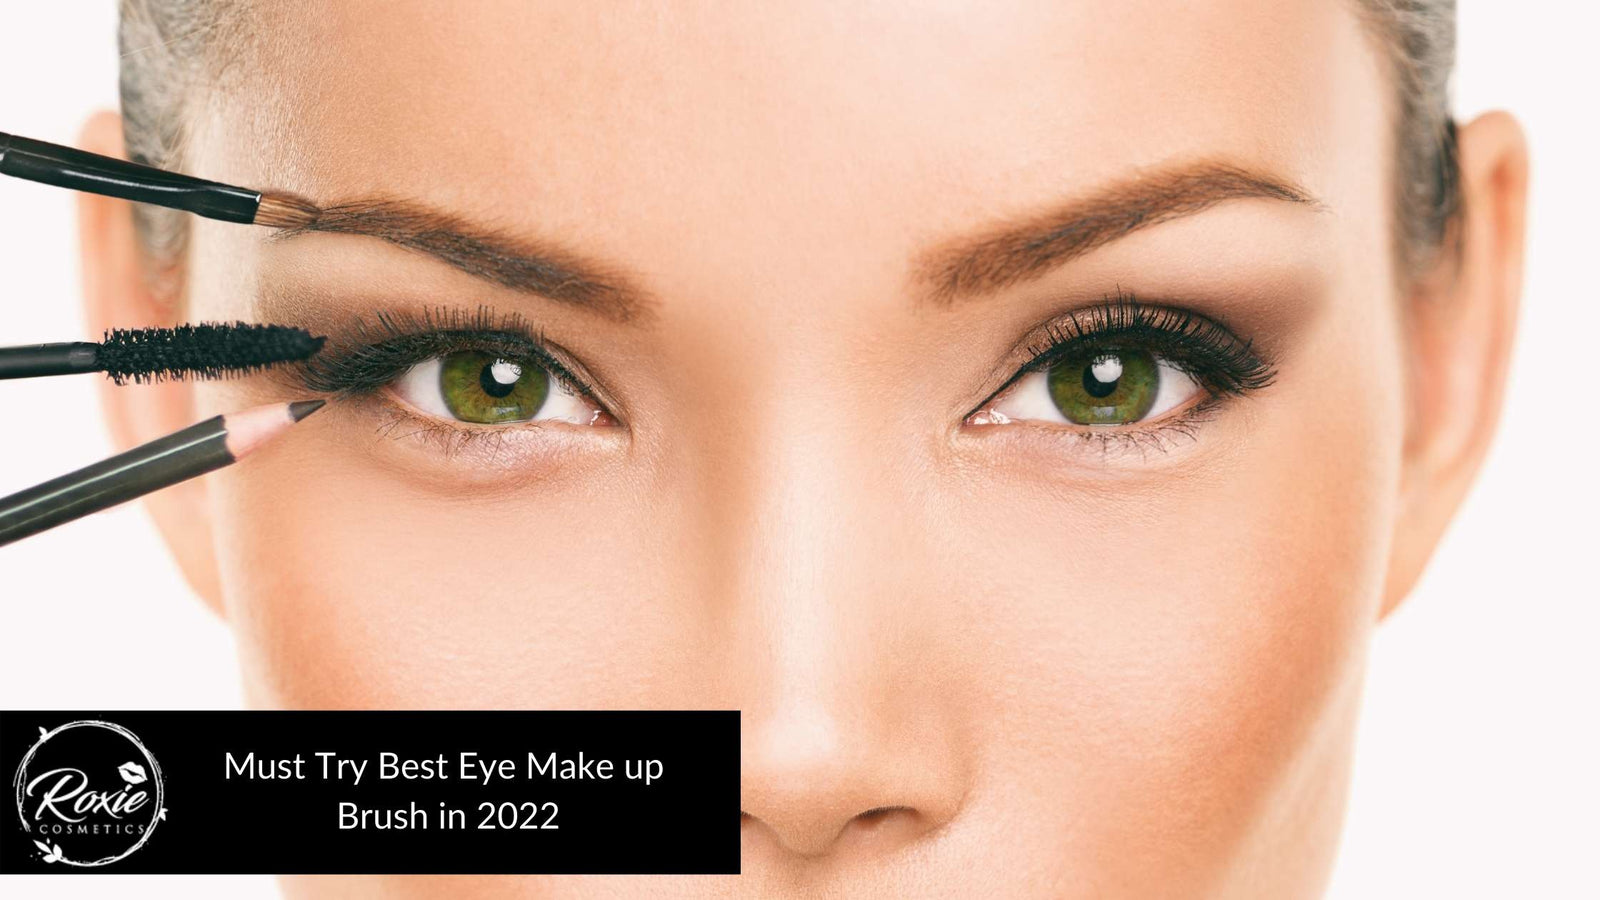 15 Must Try Best Cosmetics up Eye Brush Roxie in 2022 Make –